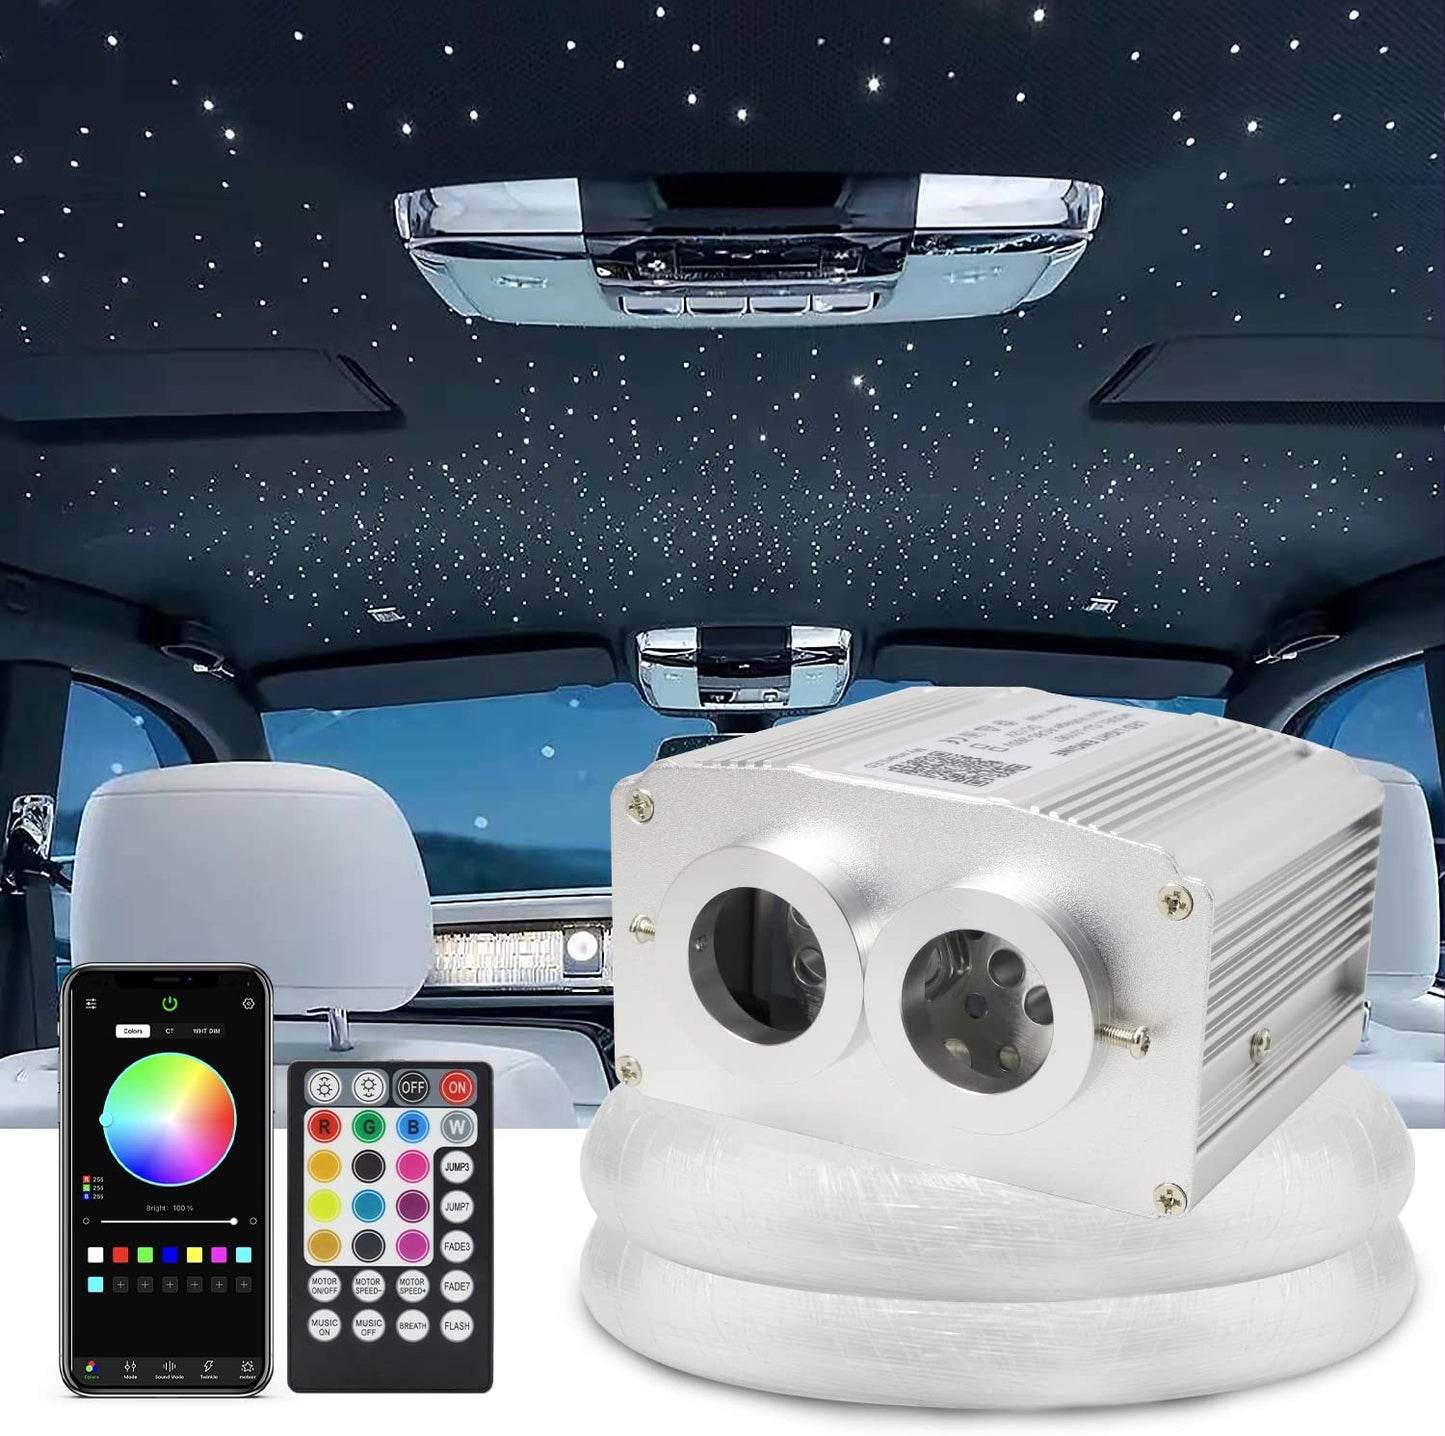 2x8W Twinkle RGBW Rolls Royce Ceiling Stars with Fiber Optic for Car Truck & Home Rooms | STARLIGHTheadliners.shop